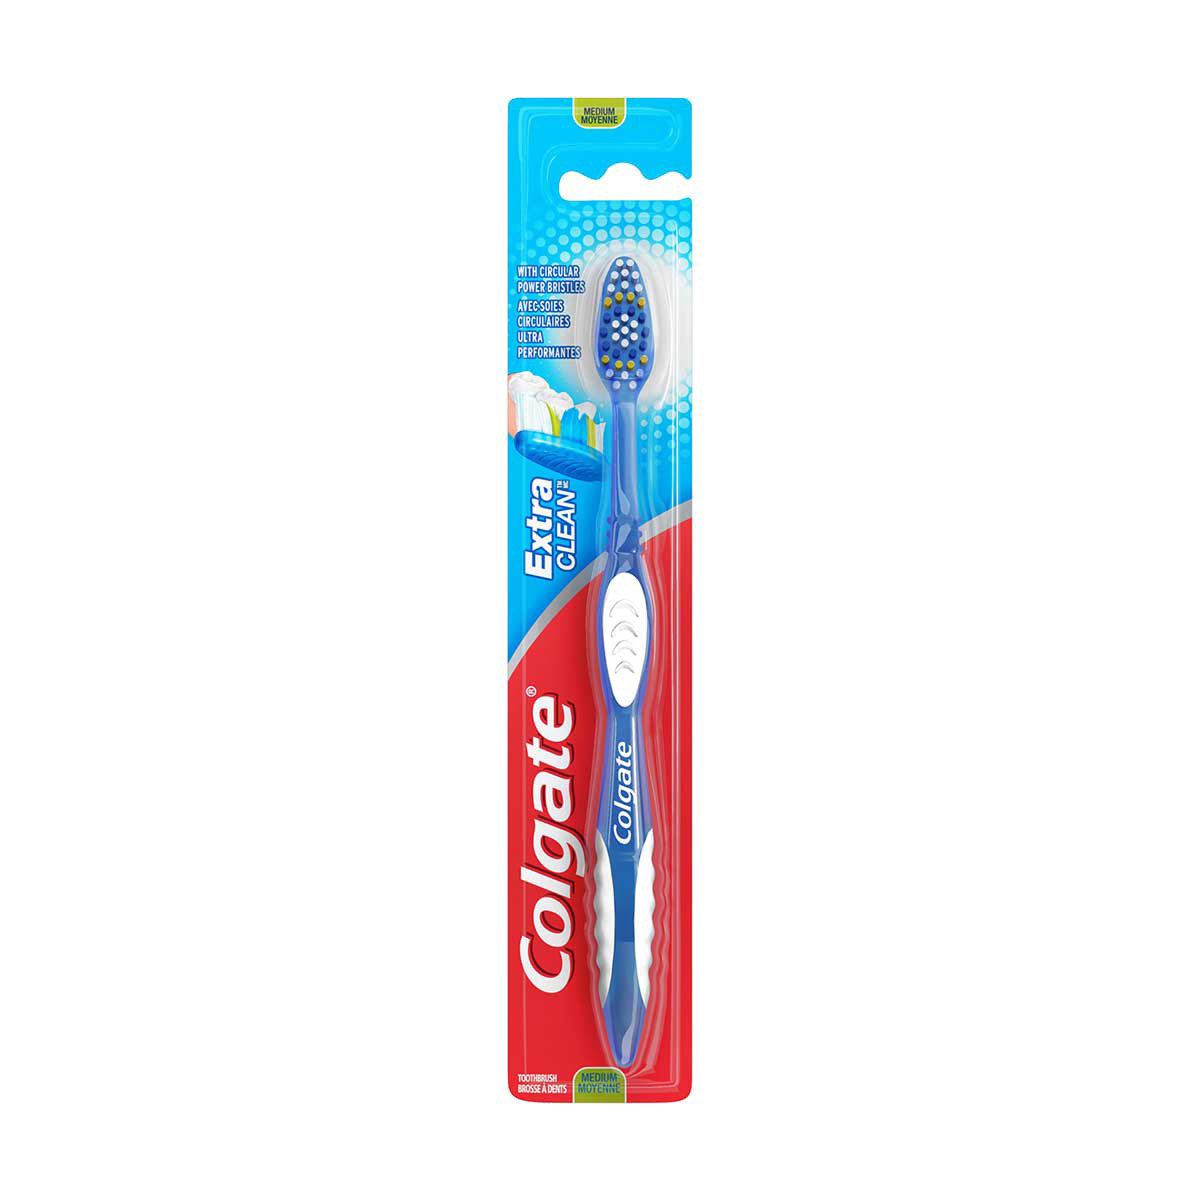 Colgate Extra Clean Full Head Toothbrush